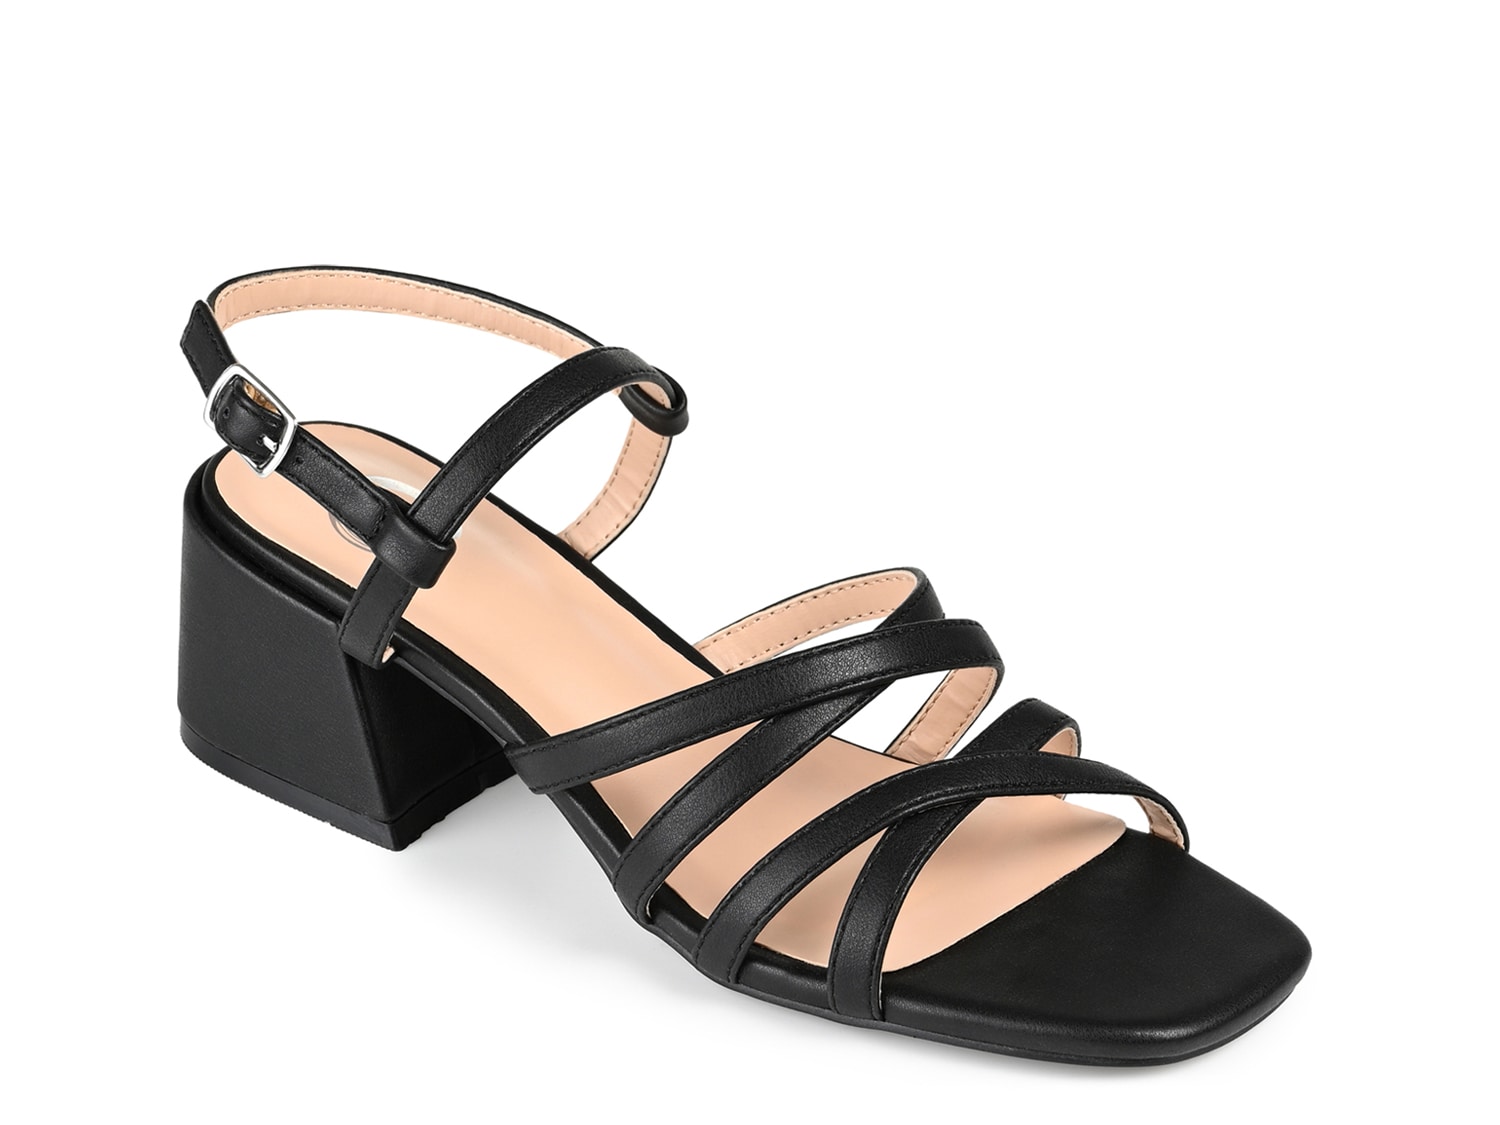 Journee Collection Kempsy Dress Sandal - Free Shipping | DSW